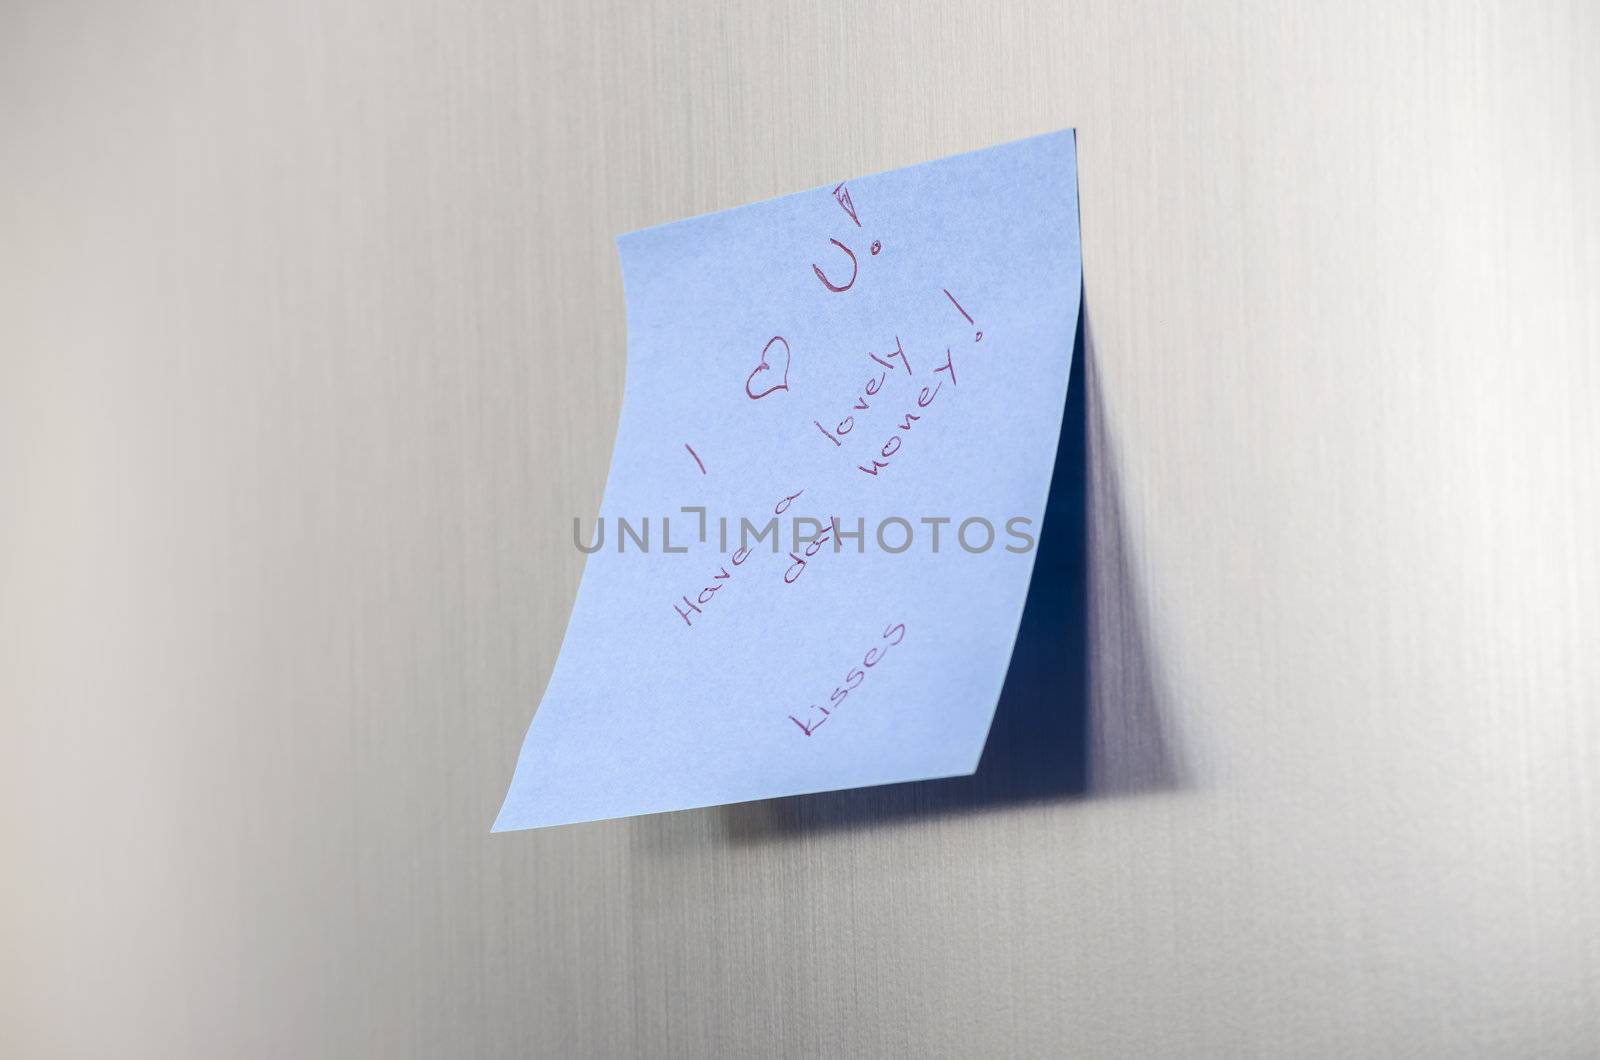 A love you message on a post it note on a stainless fridge.